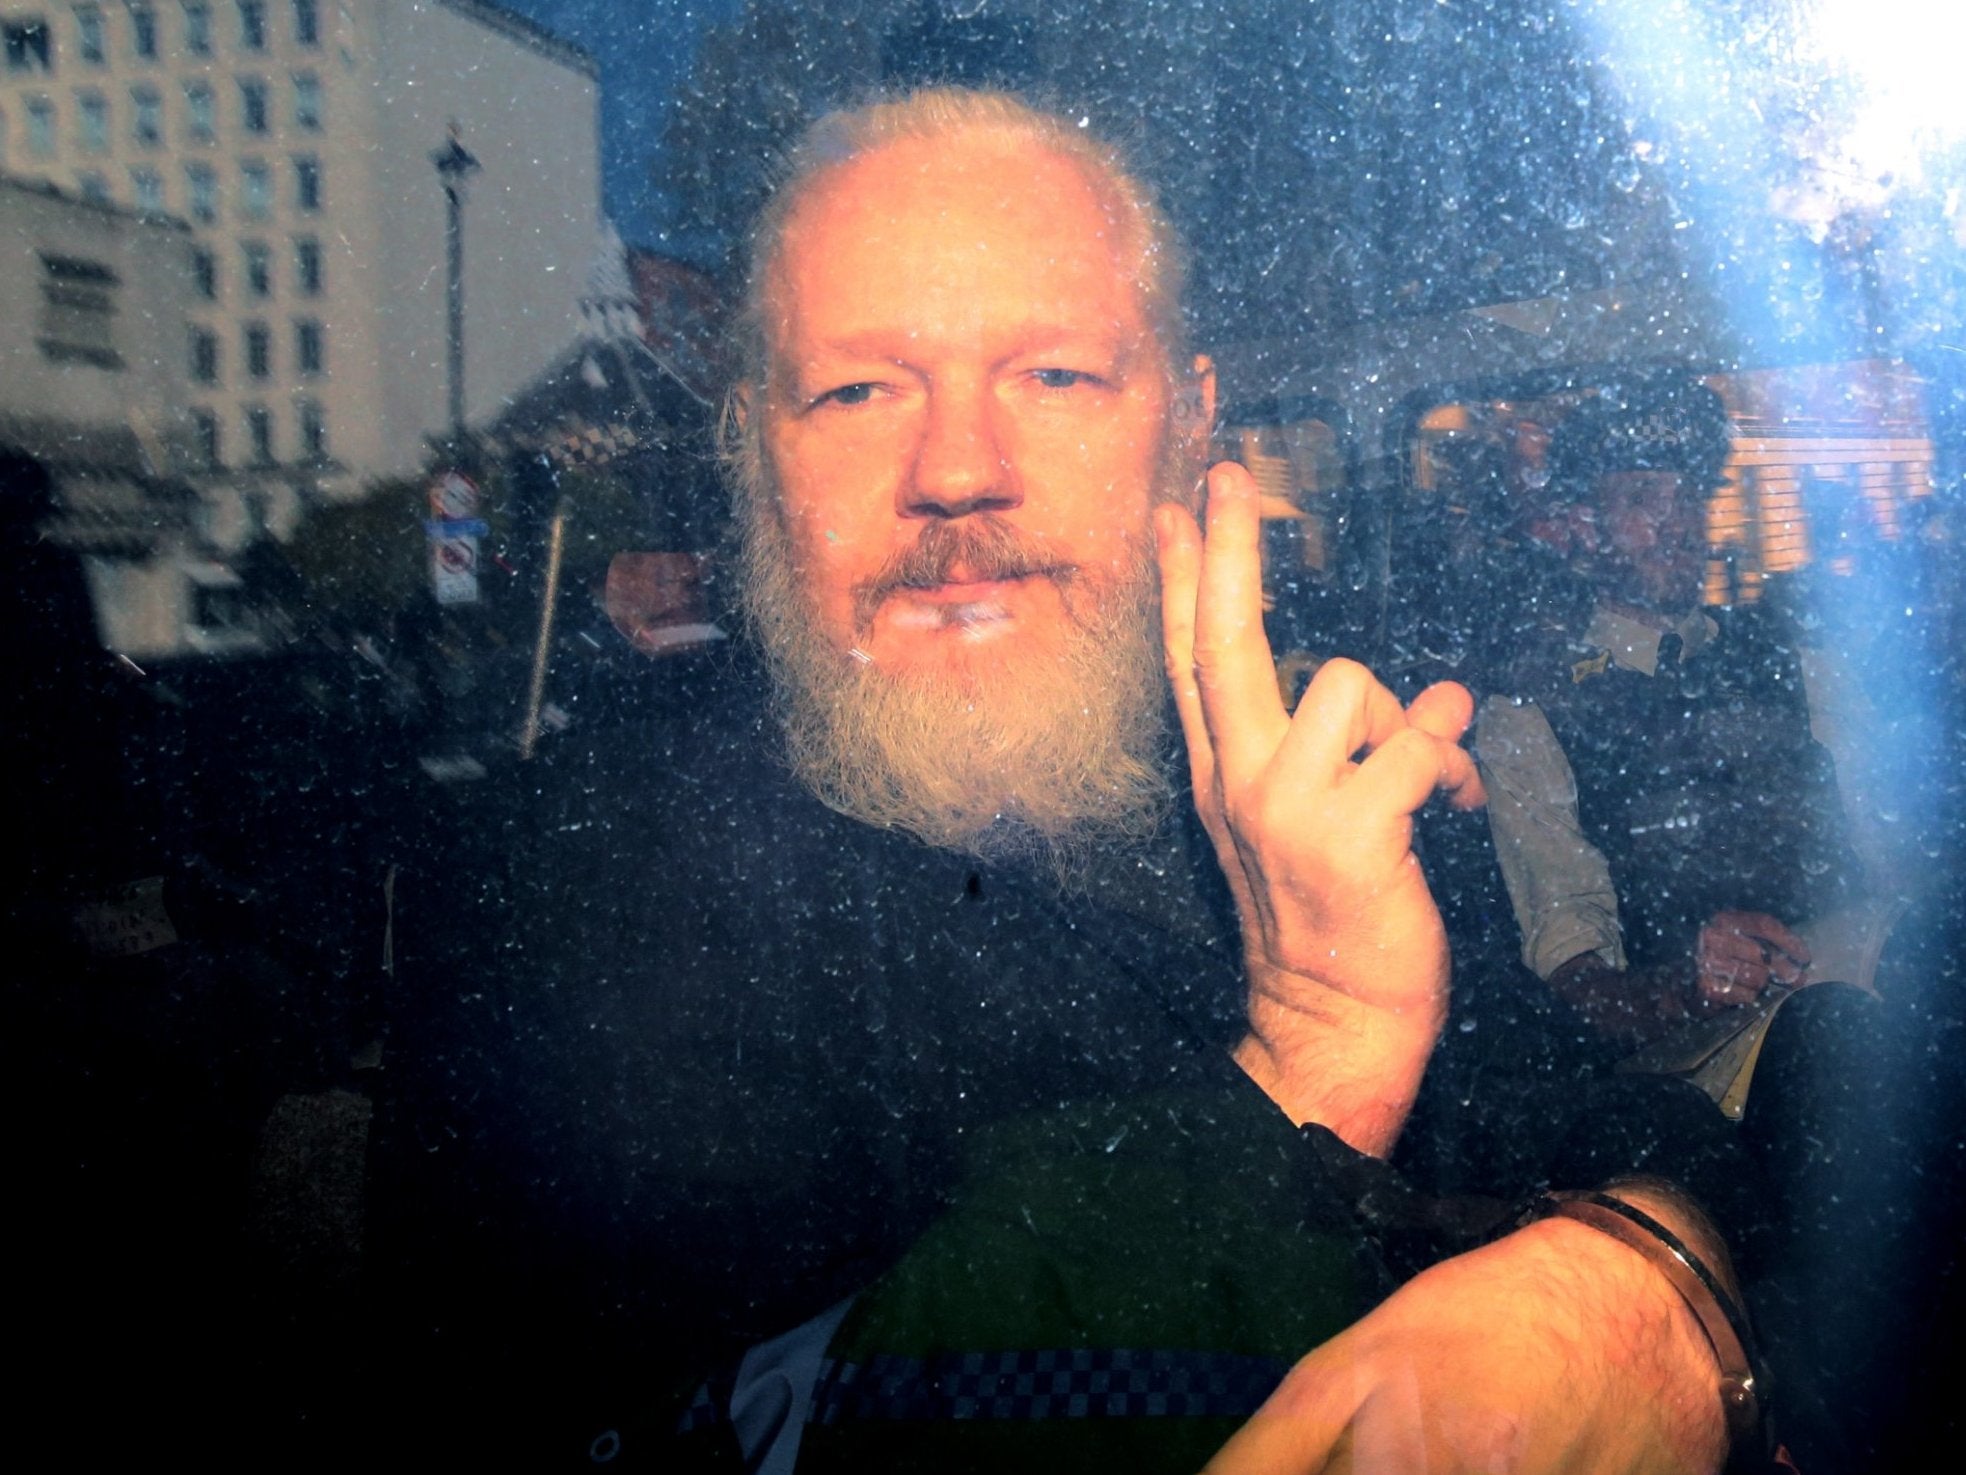 Julian Assange arrives at Westminster Magistrates' Court in a police van in April following his arrest